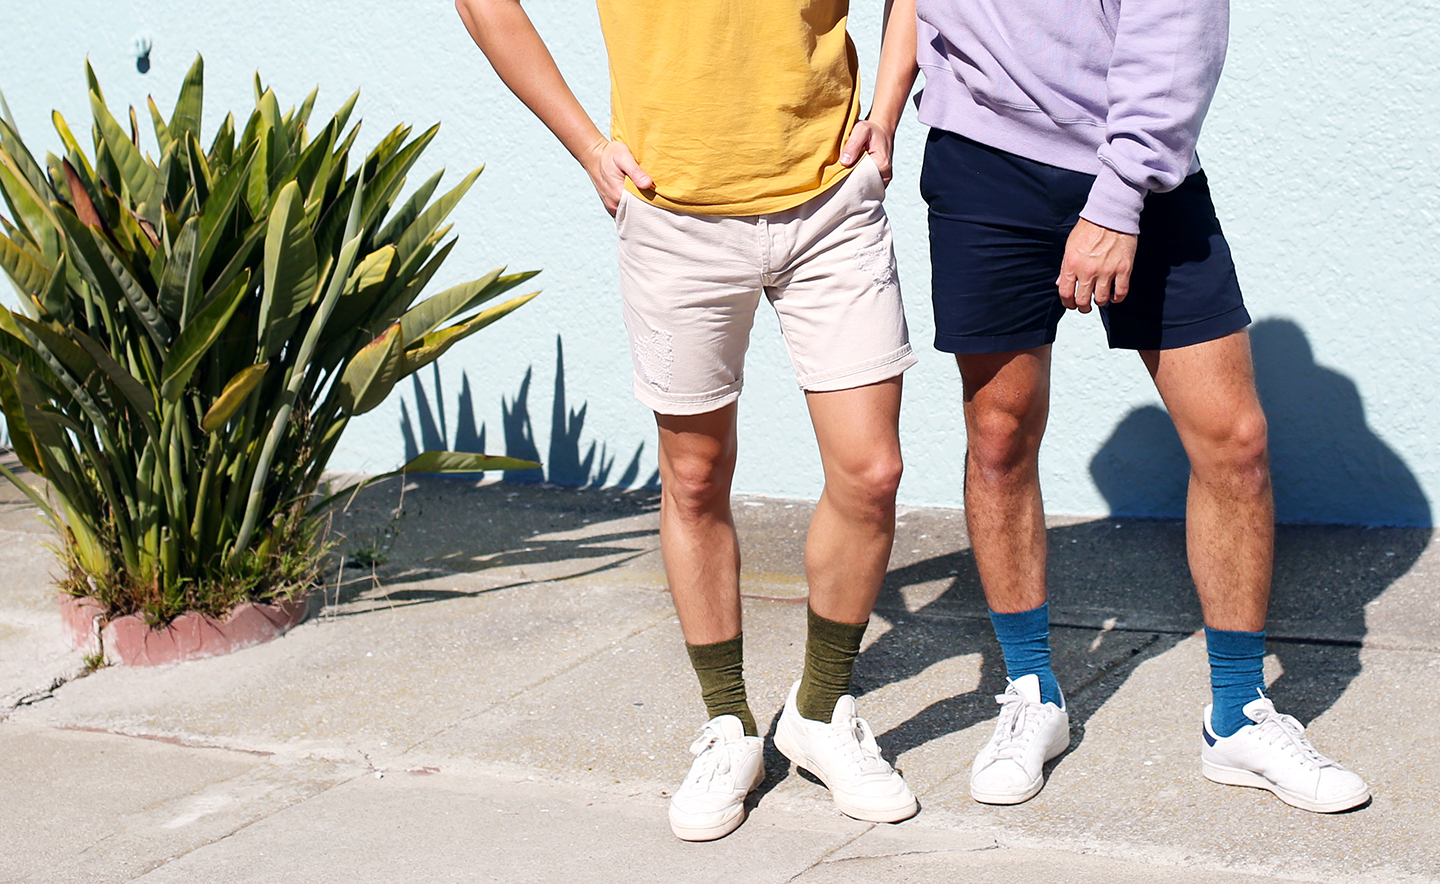 AND THE AWARD FOR UNIFORM OF FALL GOES TO — SOCKS AND SHORTS